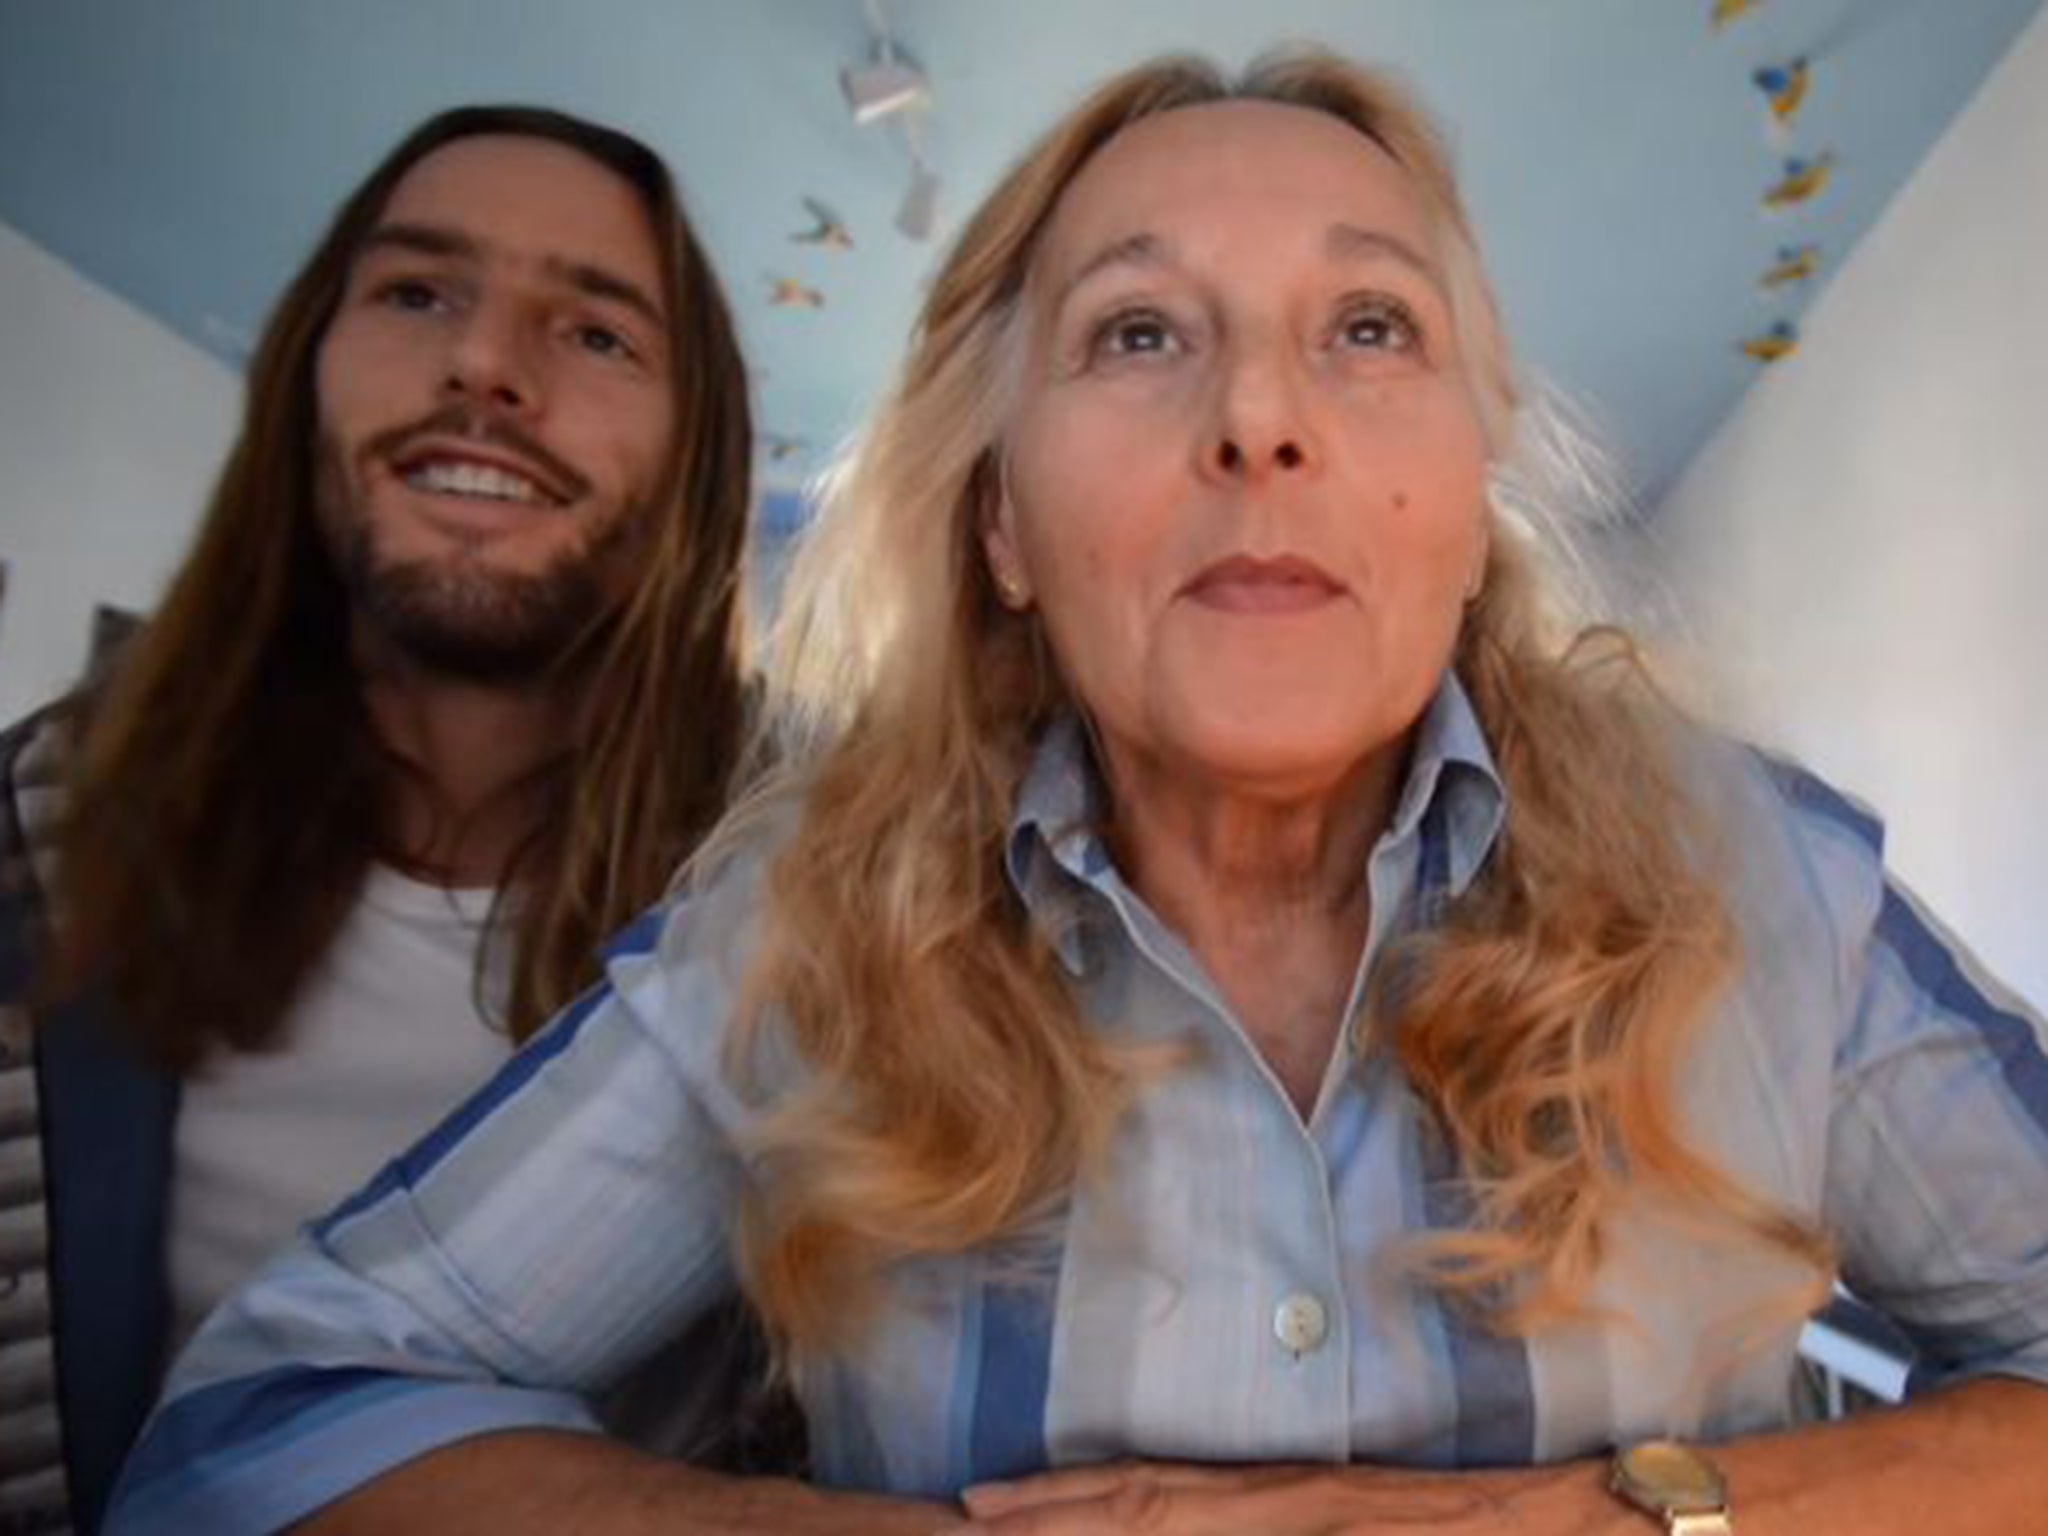 Norwegian film-maker Alex Lyngaas posted a video to YouTube to find a suitable partner for his 69-year-old mother, Eva